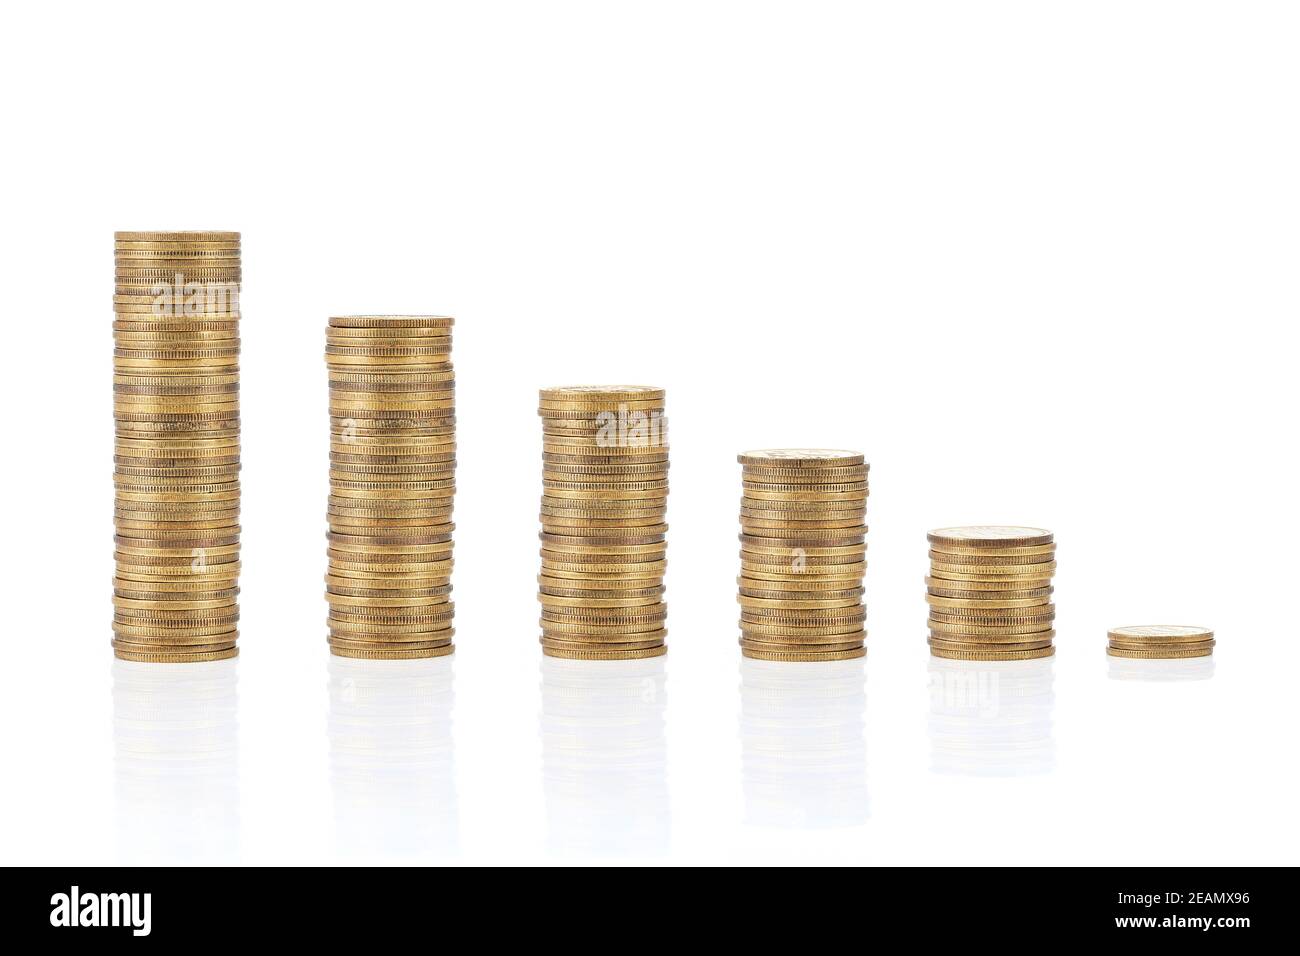 Savings. Investment concept with golden coins. Stock Photo